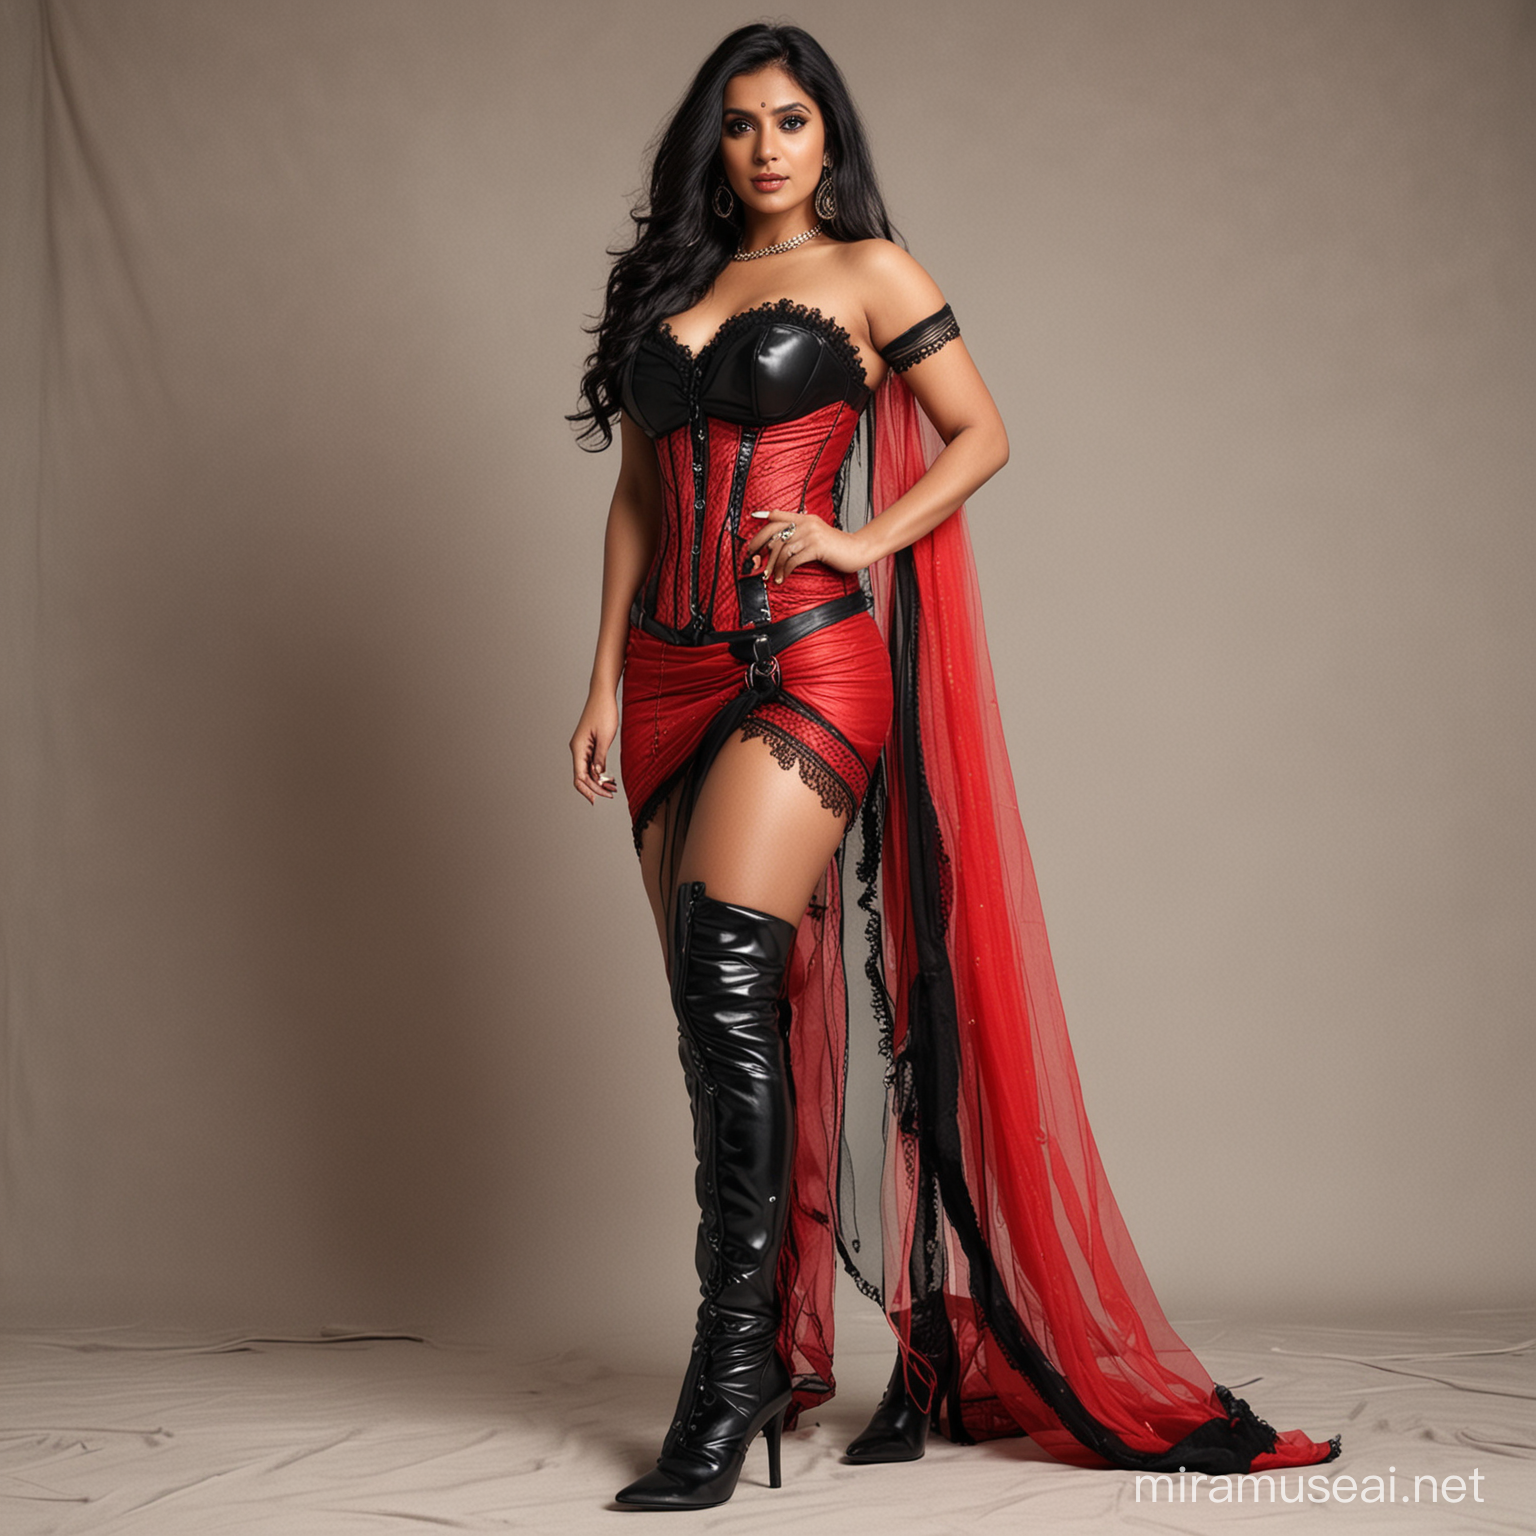 Tall Woman in Red Saree and Black Leather Corset with ThighHigh Boots